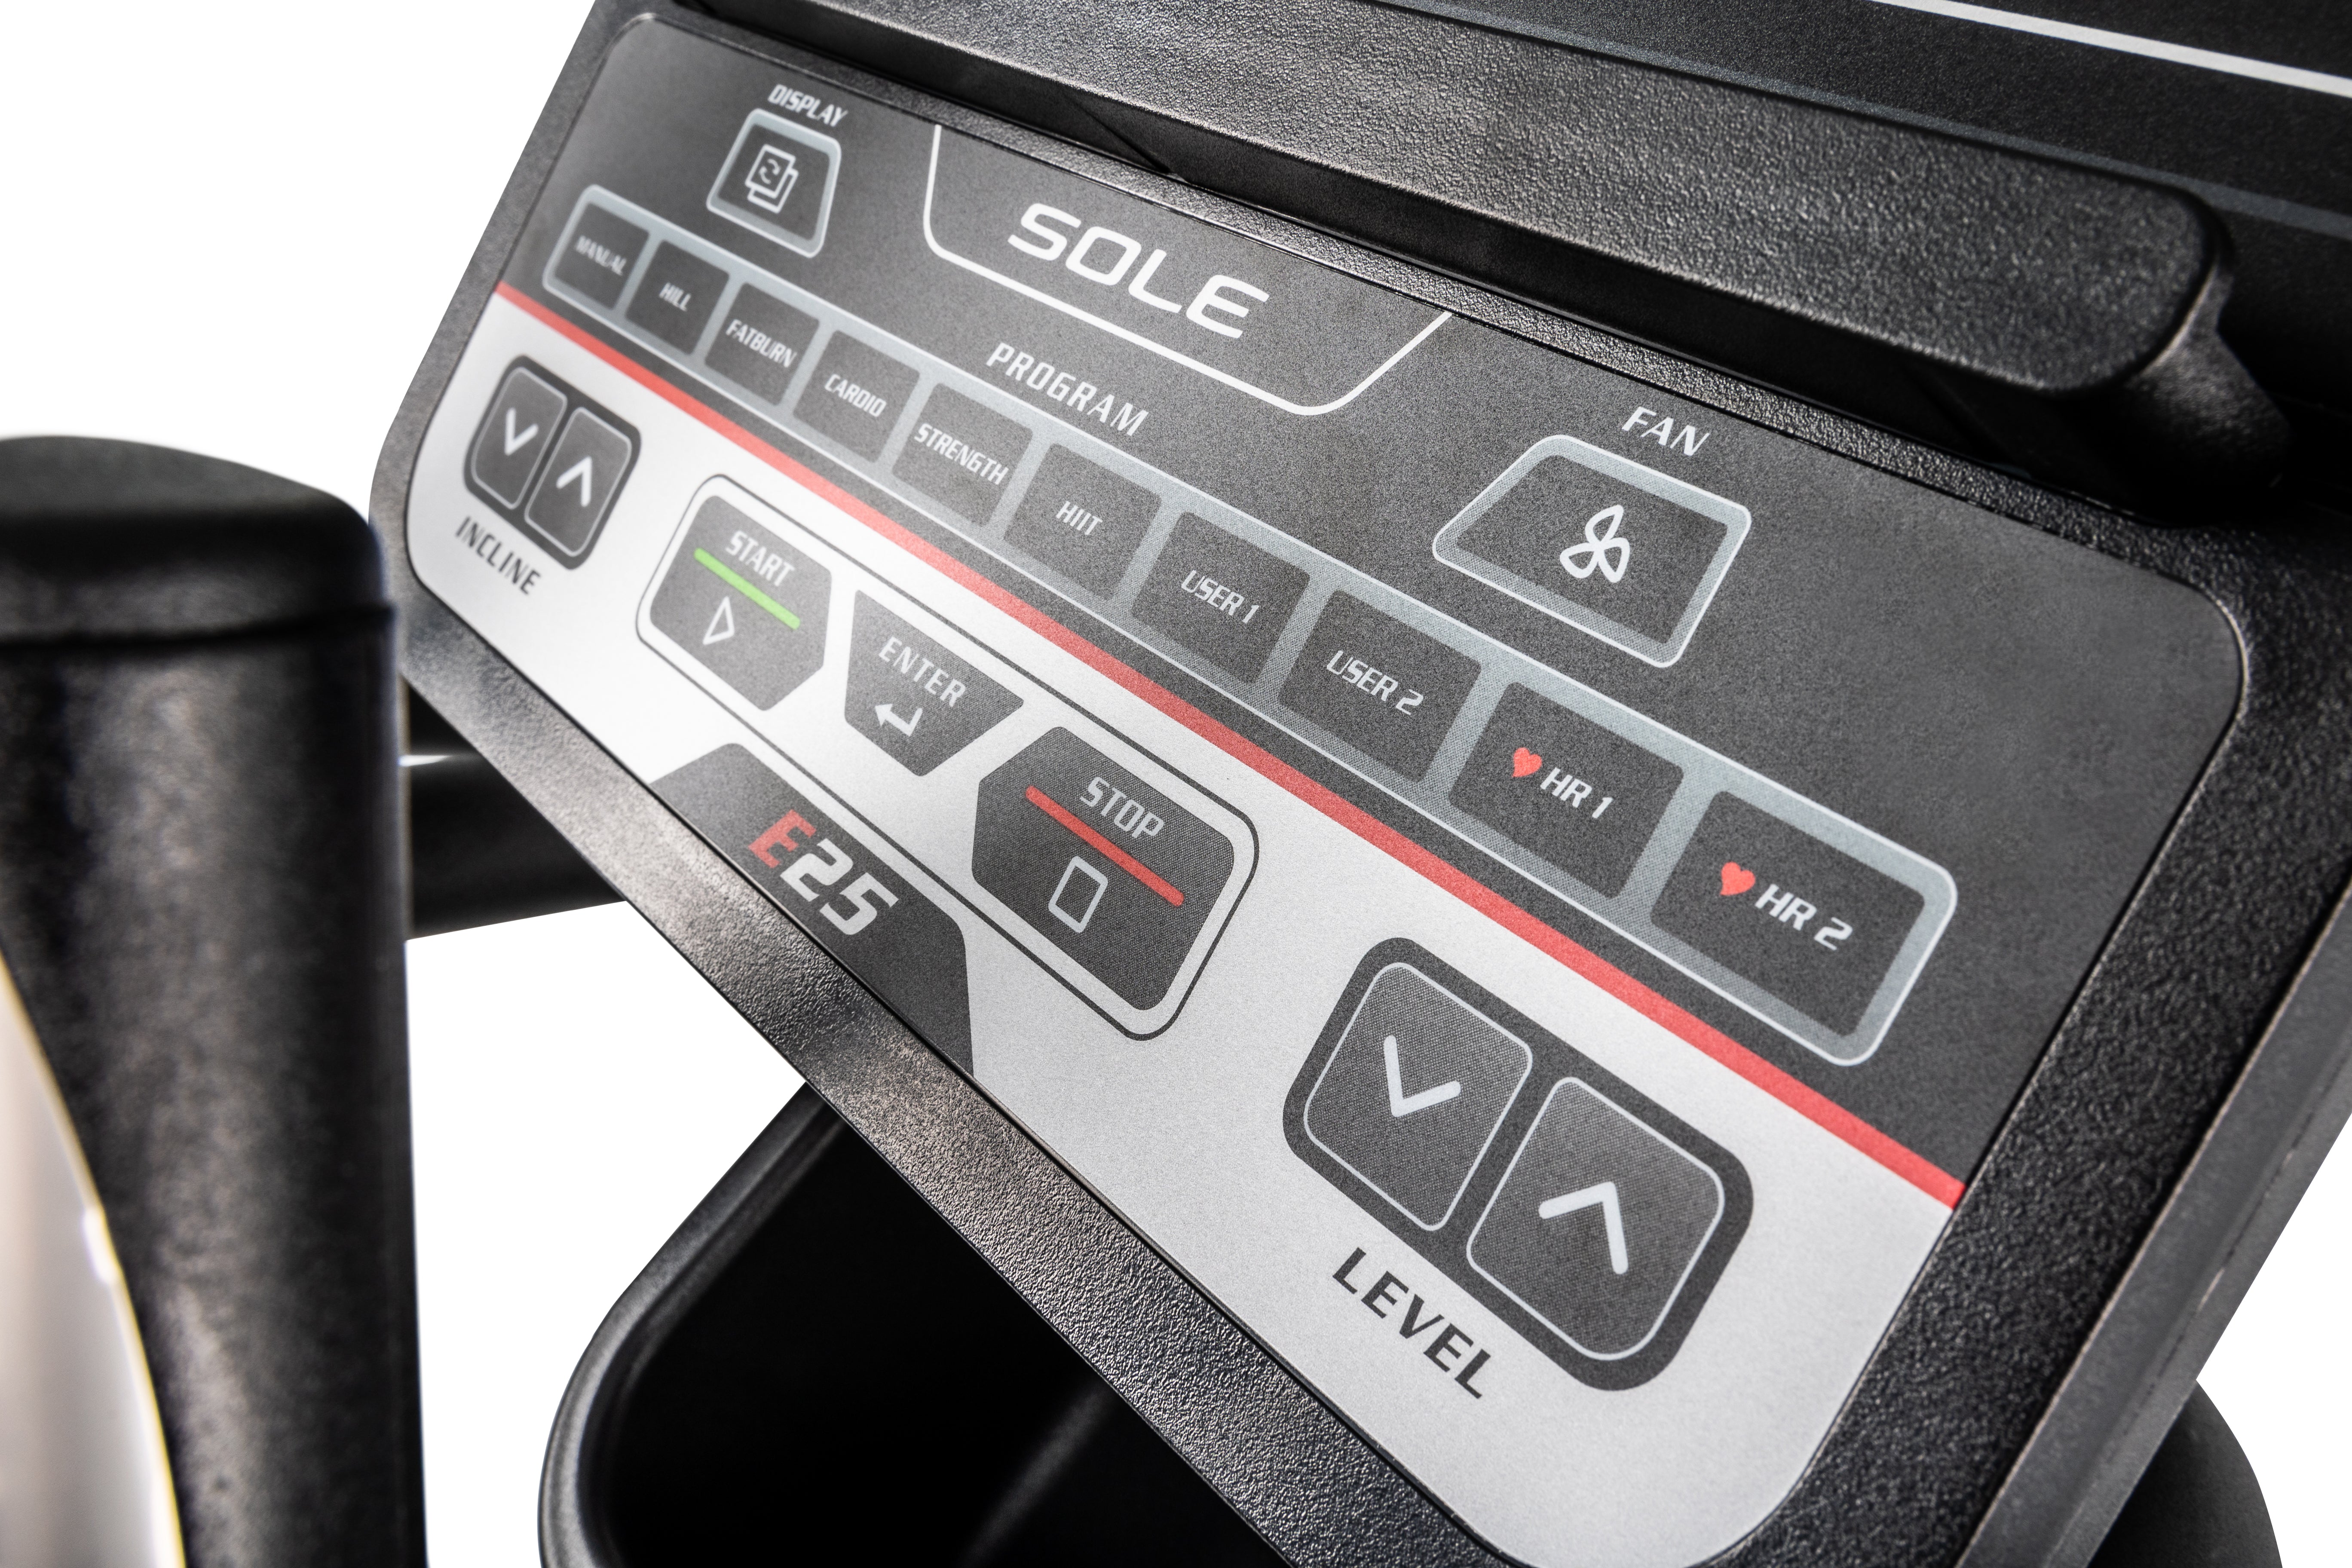 Close-up of the control panel on the Sole E25 elliptical trainer, displaying various labeled buttons such as 'INCLINE', 'PROGRAM', 'START', 'STOP', and 'LEVEL', along with the 'SOLE' logo and the model designation 'E25'.